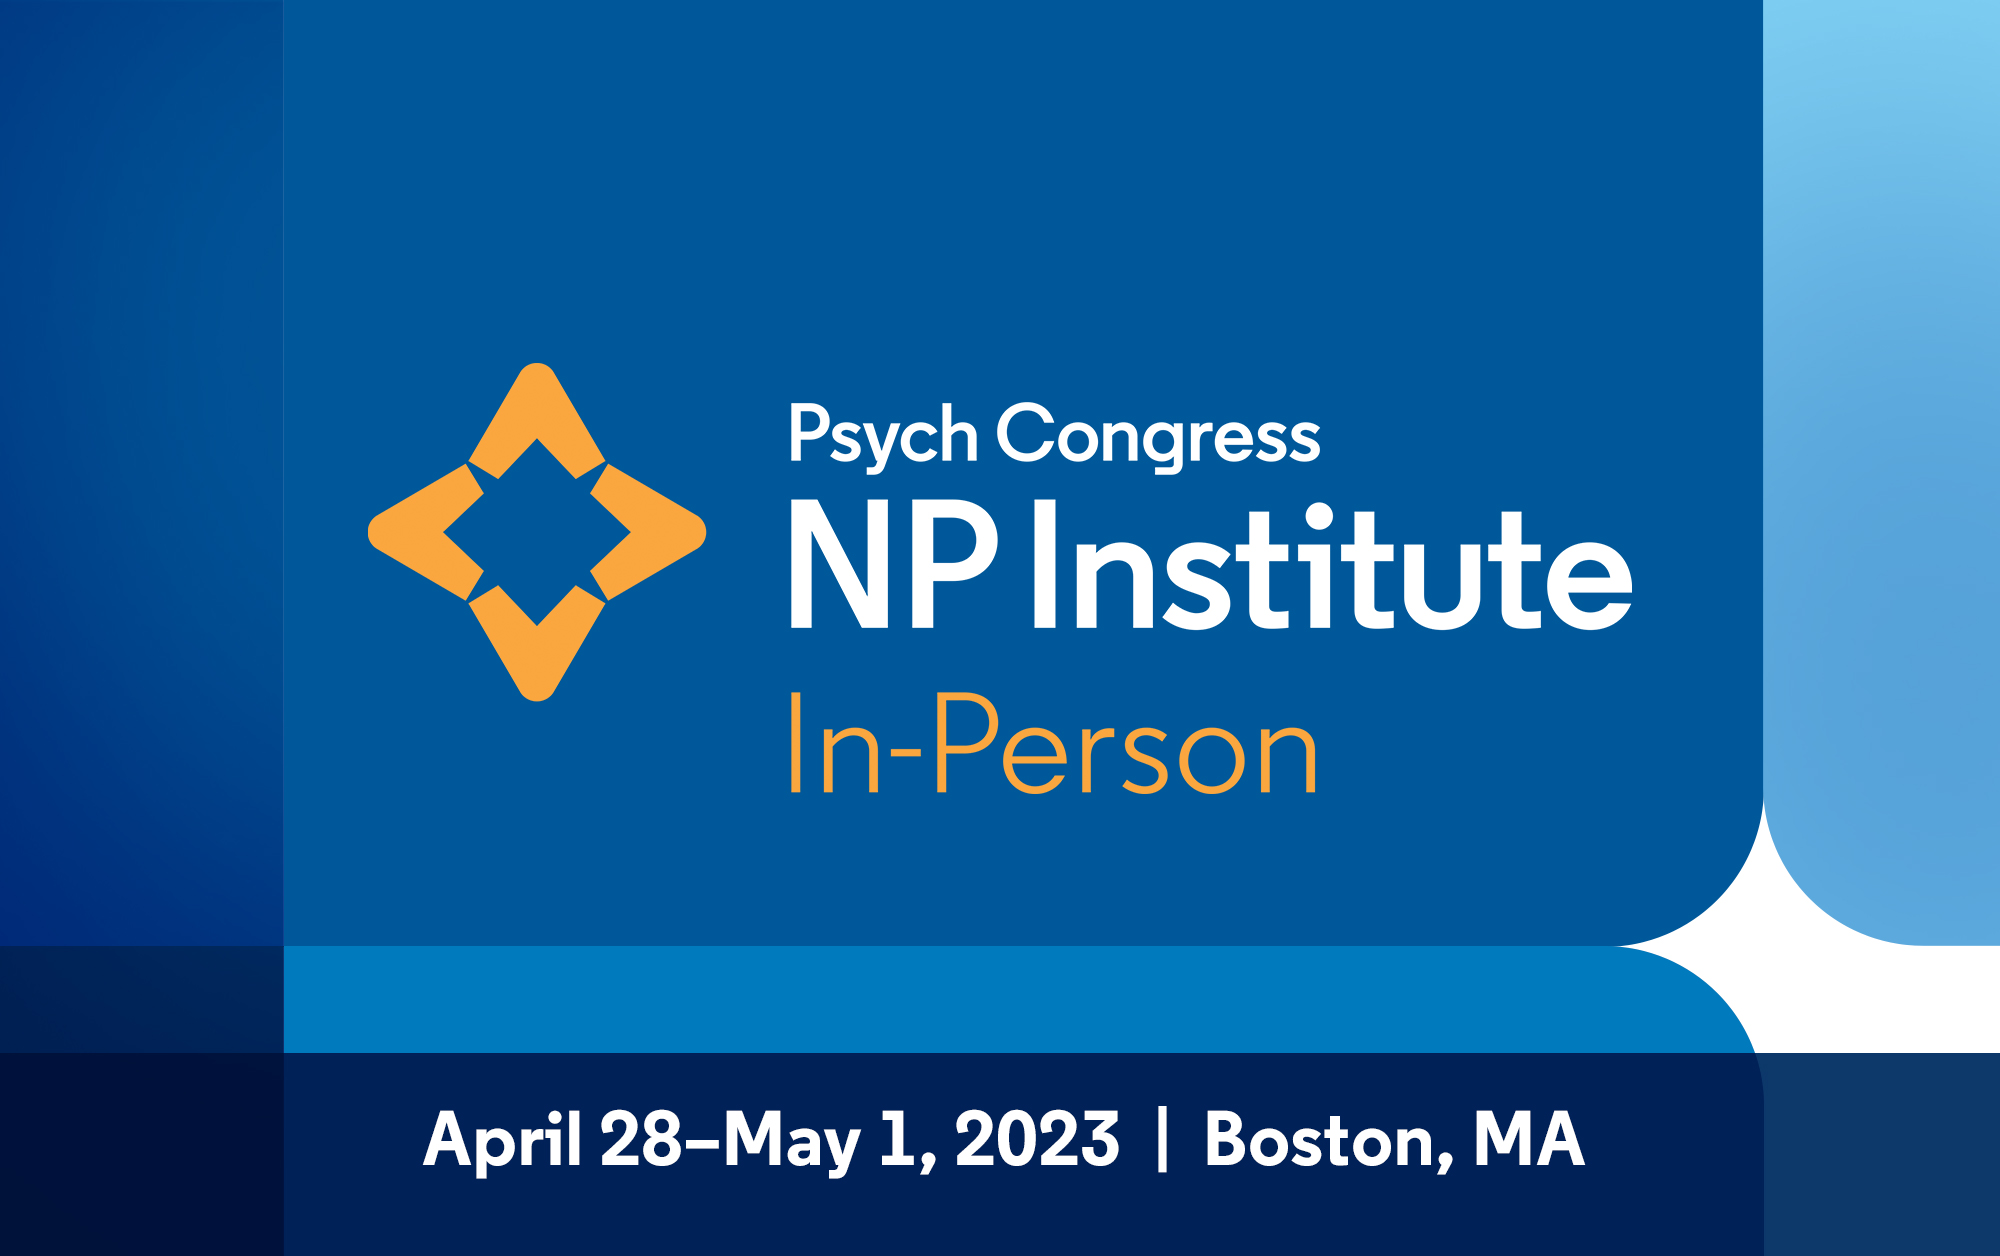 HMP Global’s Psych Congress launches NP Institute InPerson event, new